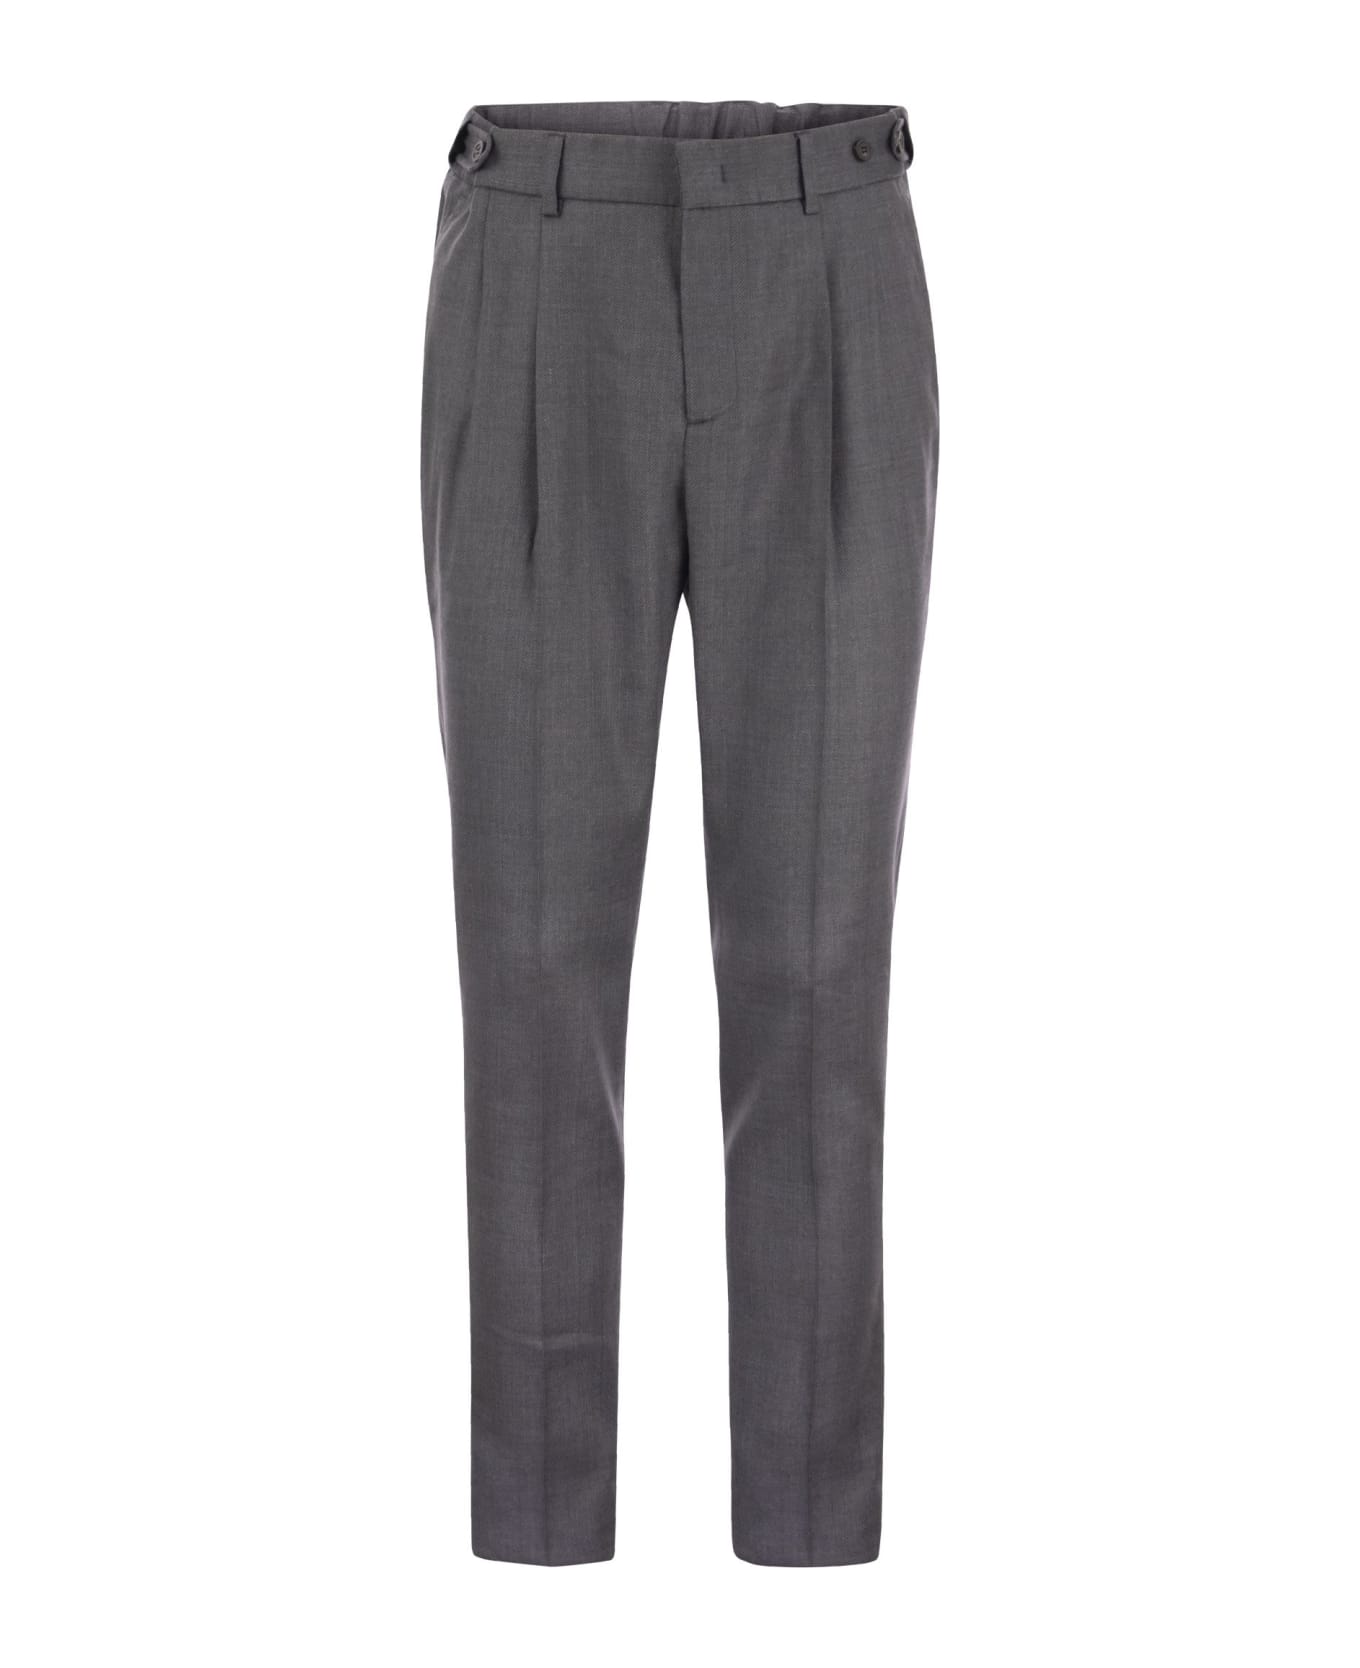 Peserico Virgin Wool And Linen Blend Trousers - Grey